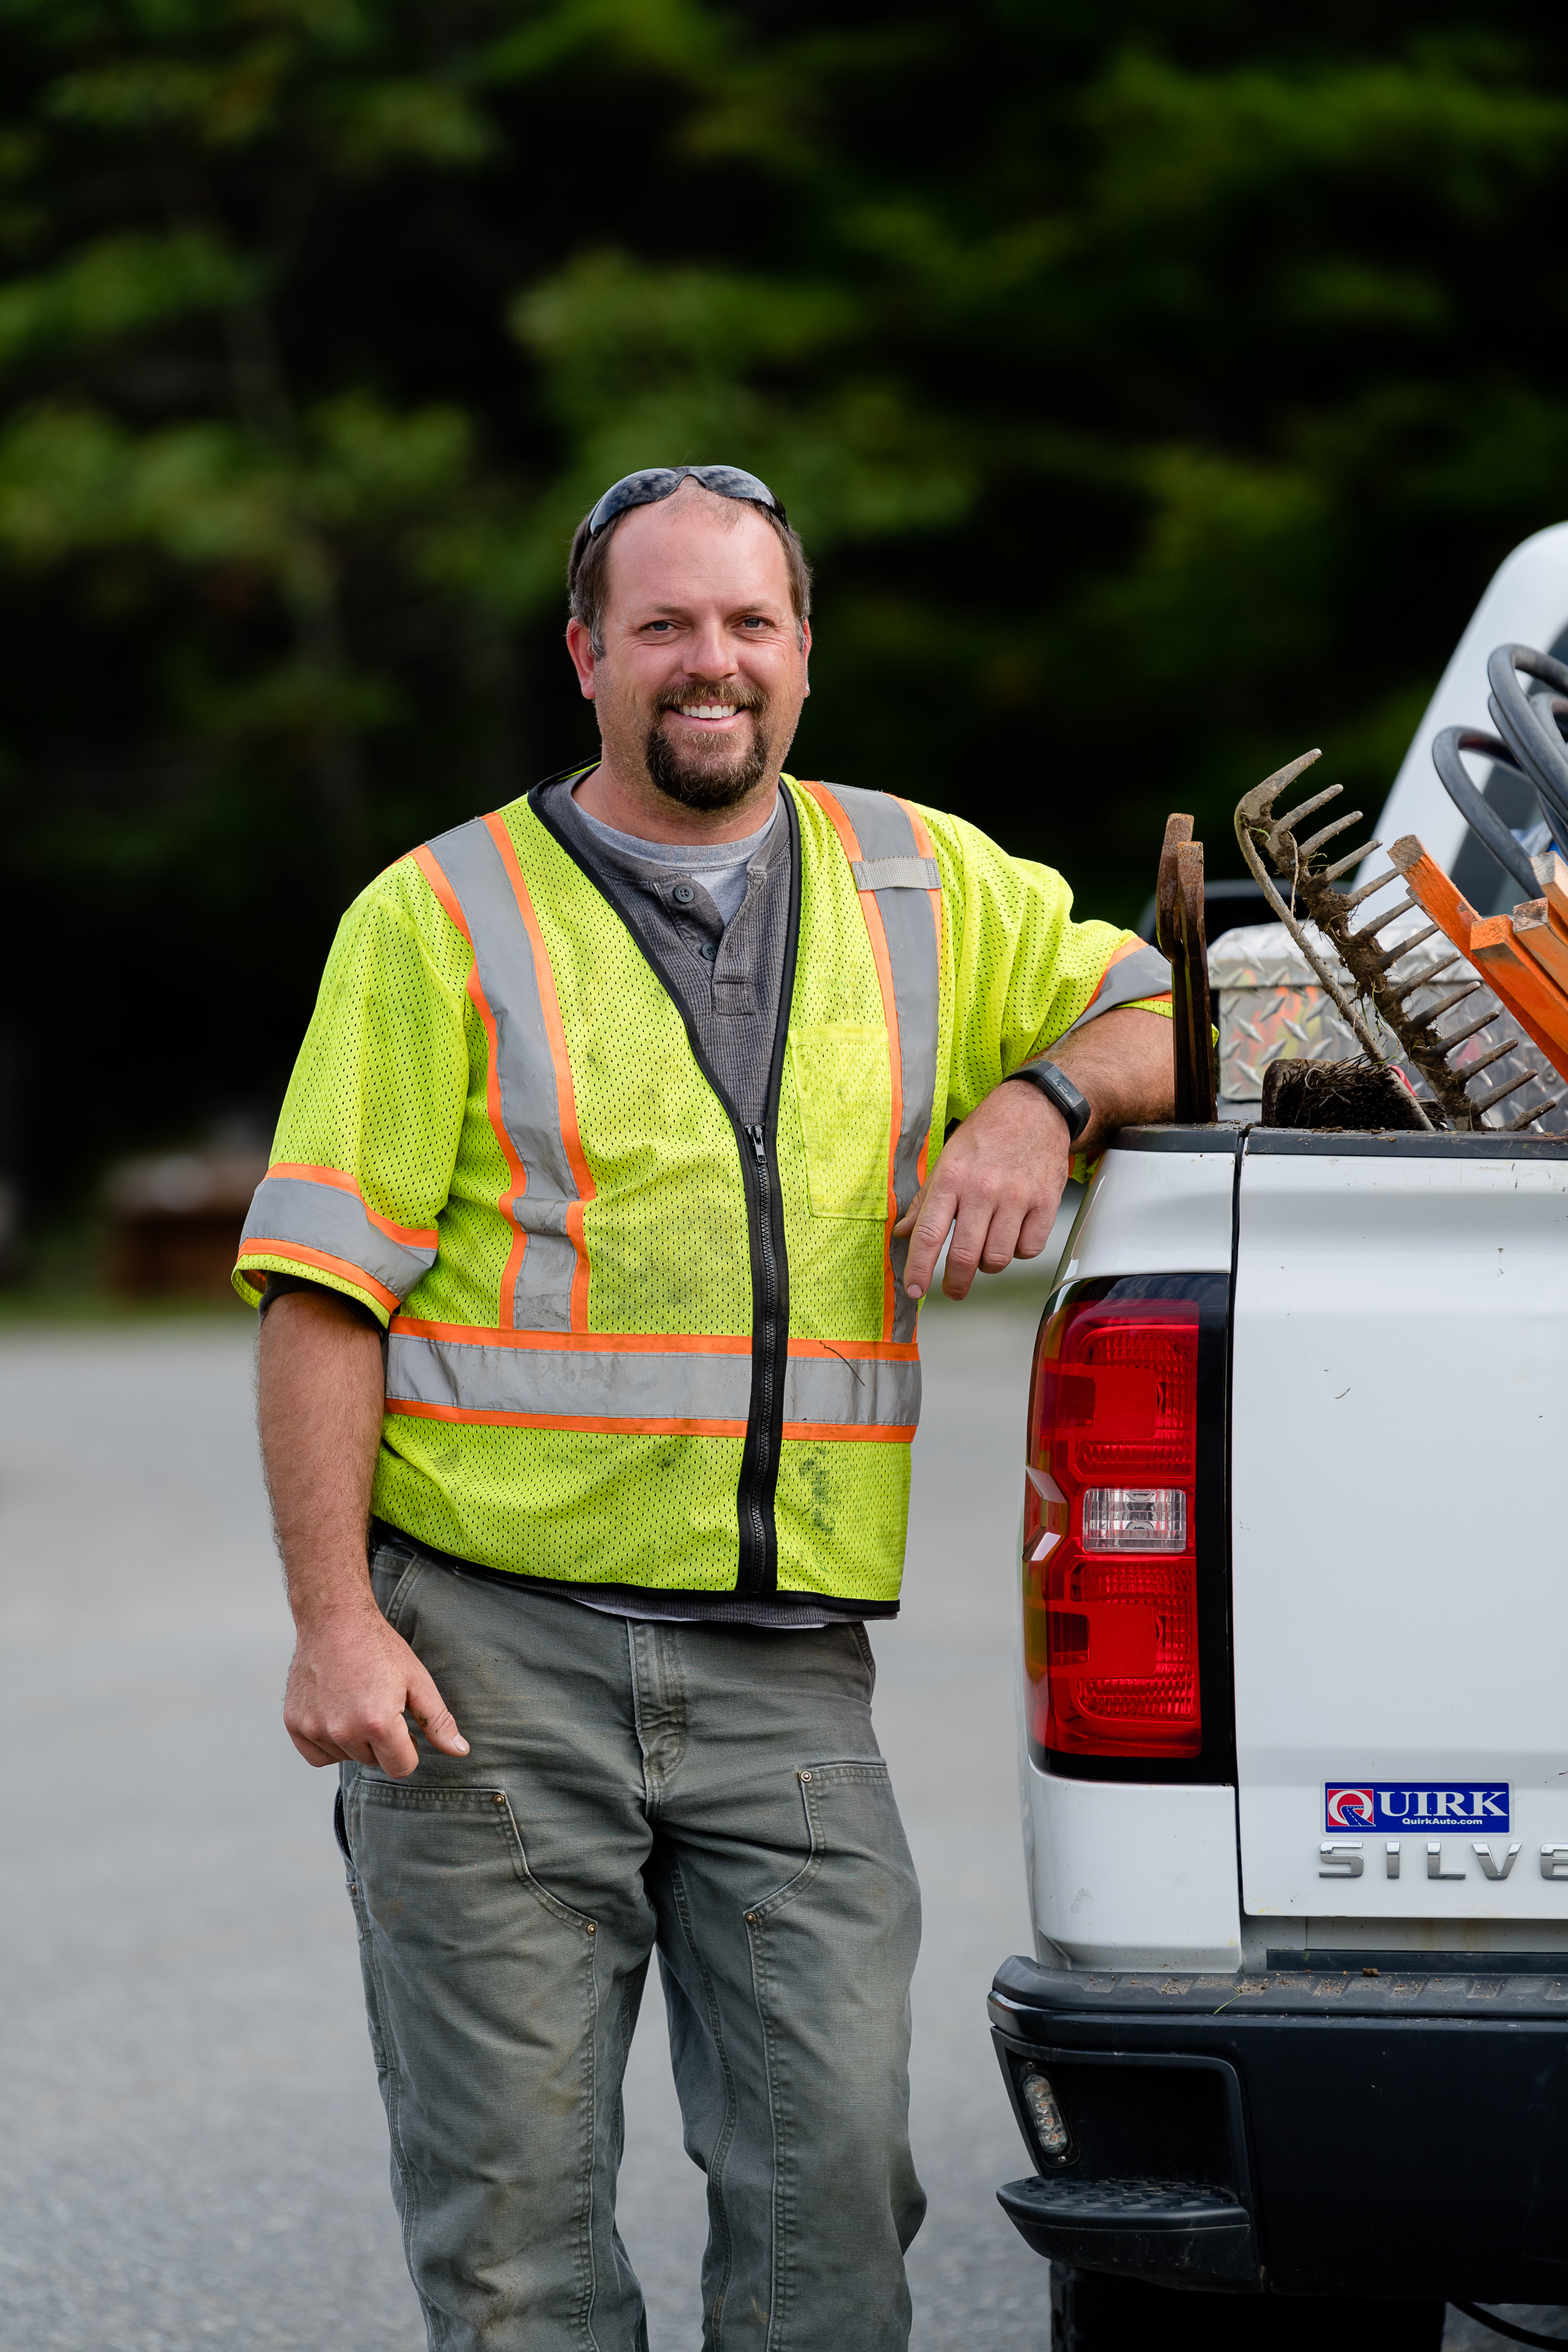 Maine Water employee leaning on his trucking smiling while looking at the camera